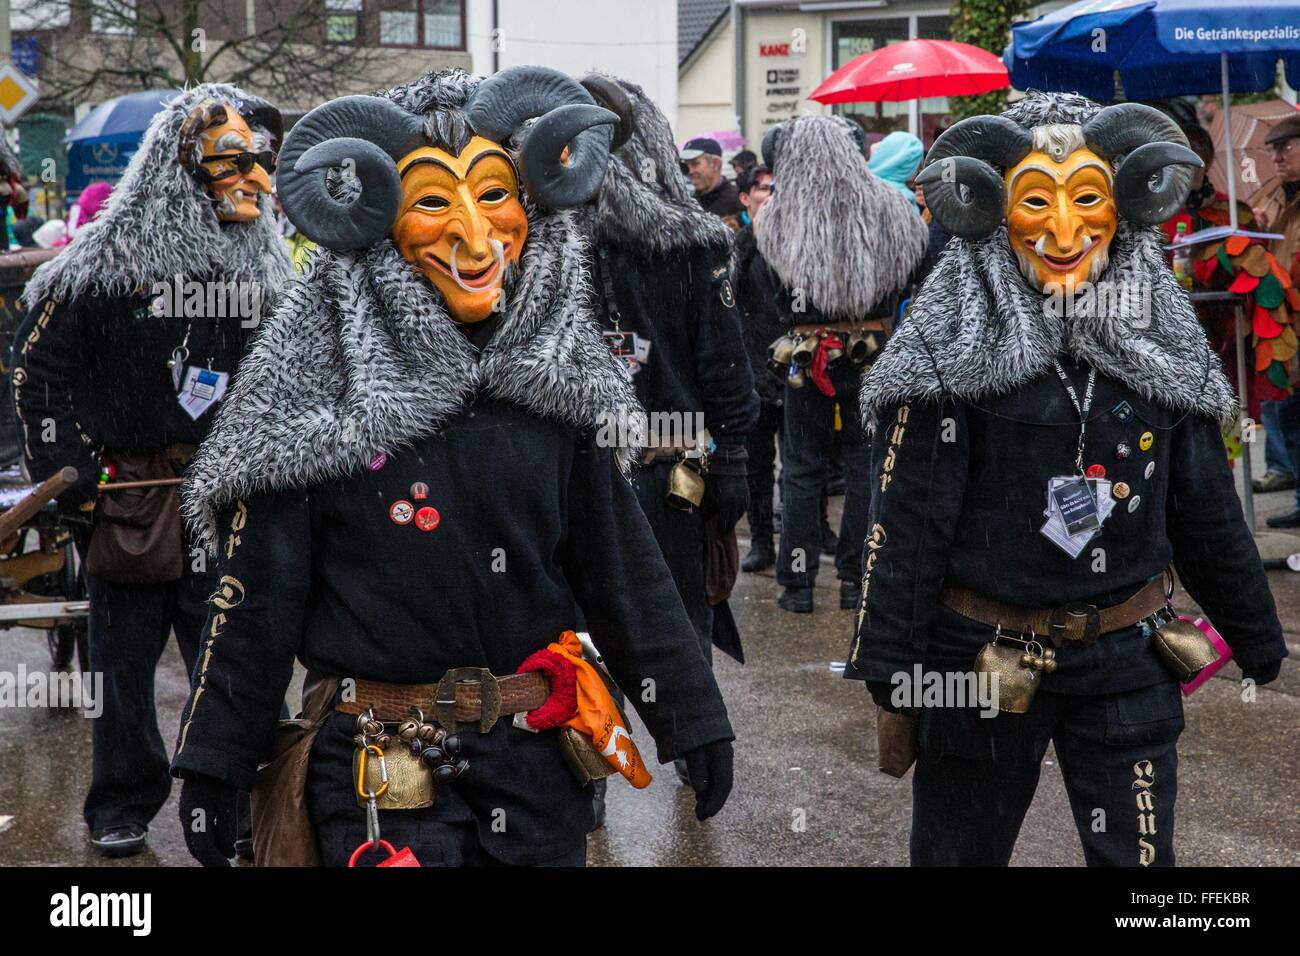 Swabian-Aleman carnival with witches, devils & more, Althuette, Germany, Jan. 31, 2016. Stock Photo